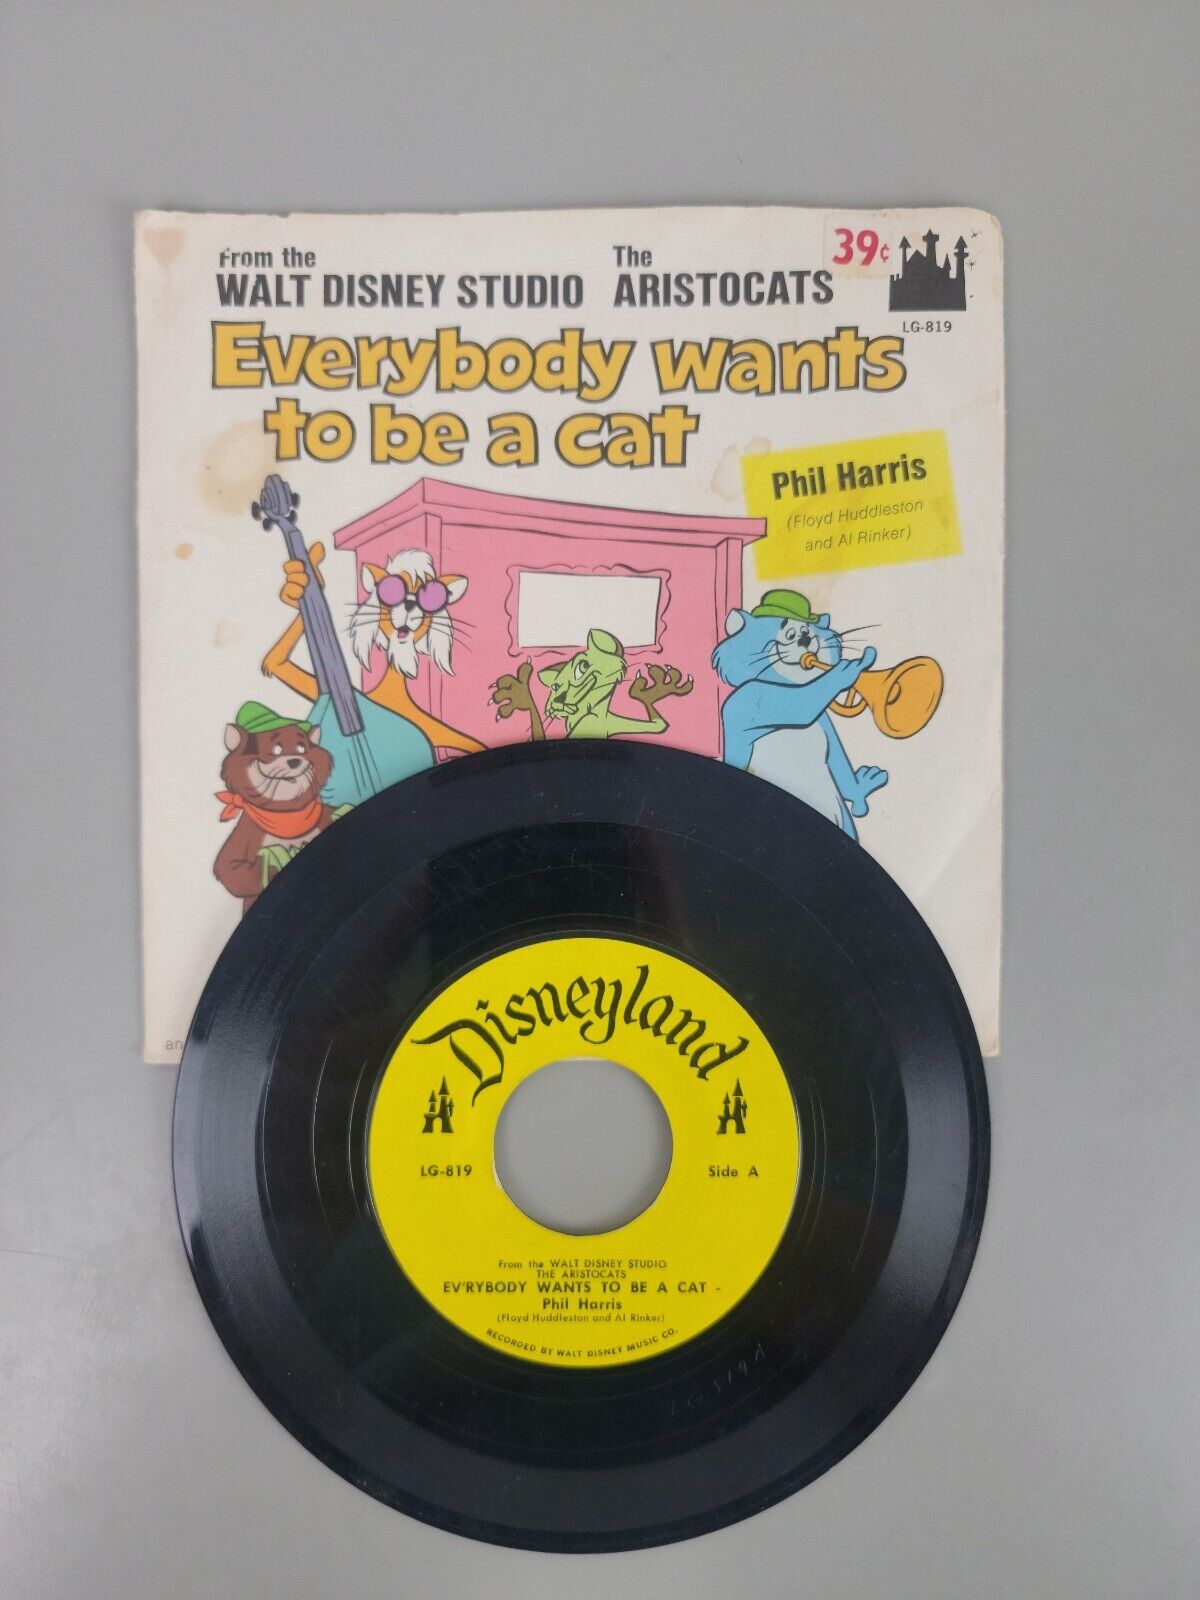 The ARISTOCATS 45 RPM Vinyl Record Disneyland LG-819 Everybody Wants To Be A Cat